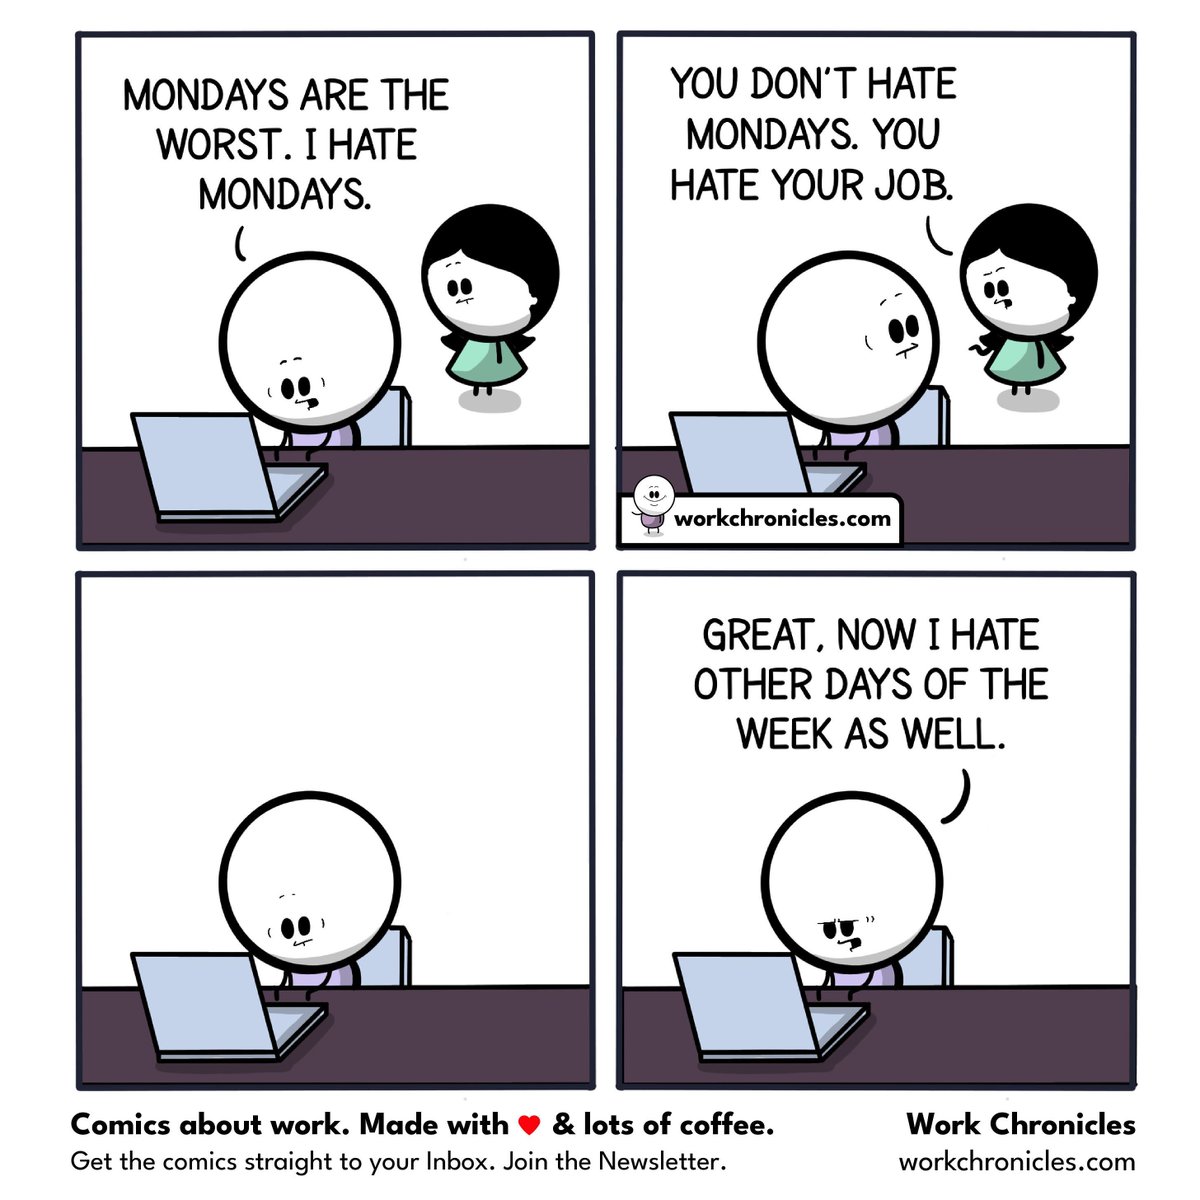 'Mondays are the worst! But it's not Mondays you hate, it's your job. Check out buff.ly/3Uje9dX for comics about work and the struggles we face. #WorkChronicles #CoffeeAddict'